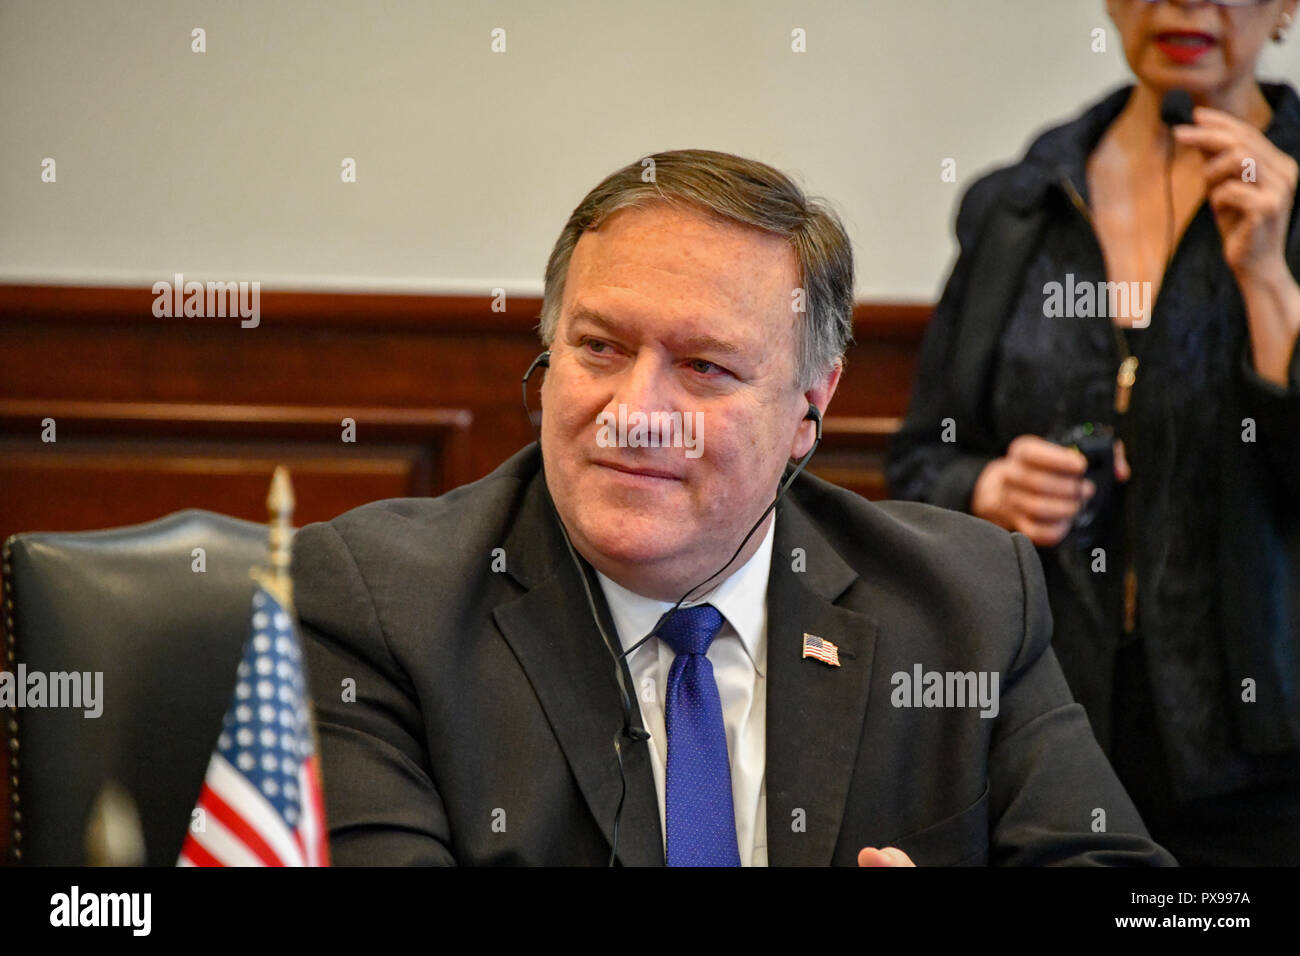 Mexico. 21st Oct, 2018. Mexico. 19th Oct, 2018. U.S. Secretary of State Mike Pompeo during a meeting with Mexican President Enrique Pena Nieto on immigration and the refugee caravan at Los Pinos October 19, 2018 in Mexico City, Mexico. Credit: Planetpix/Alamy Live News Stock Photo